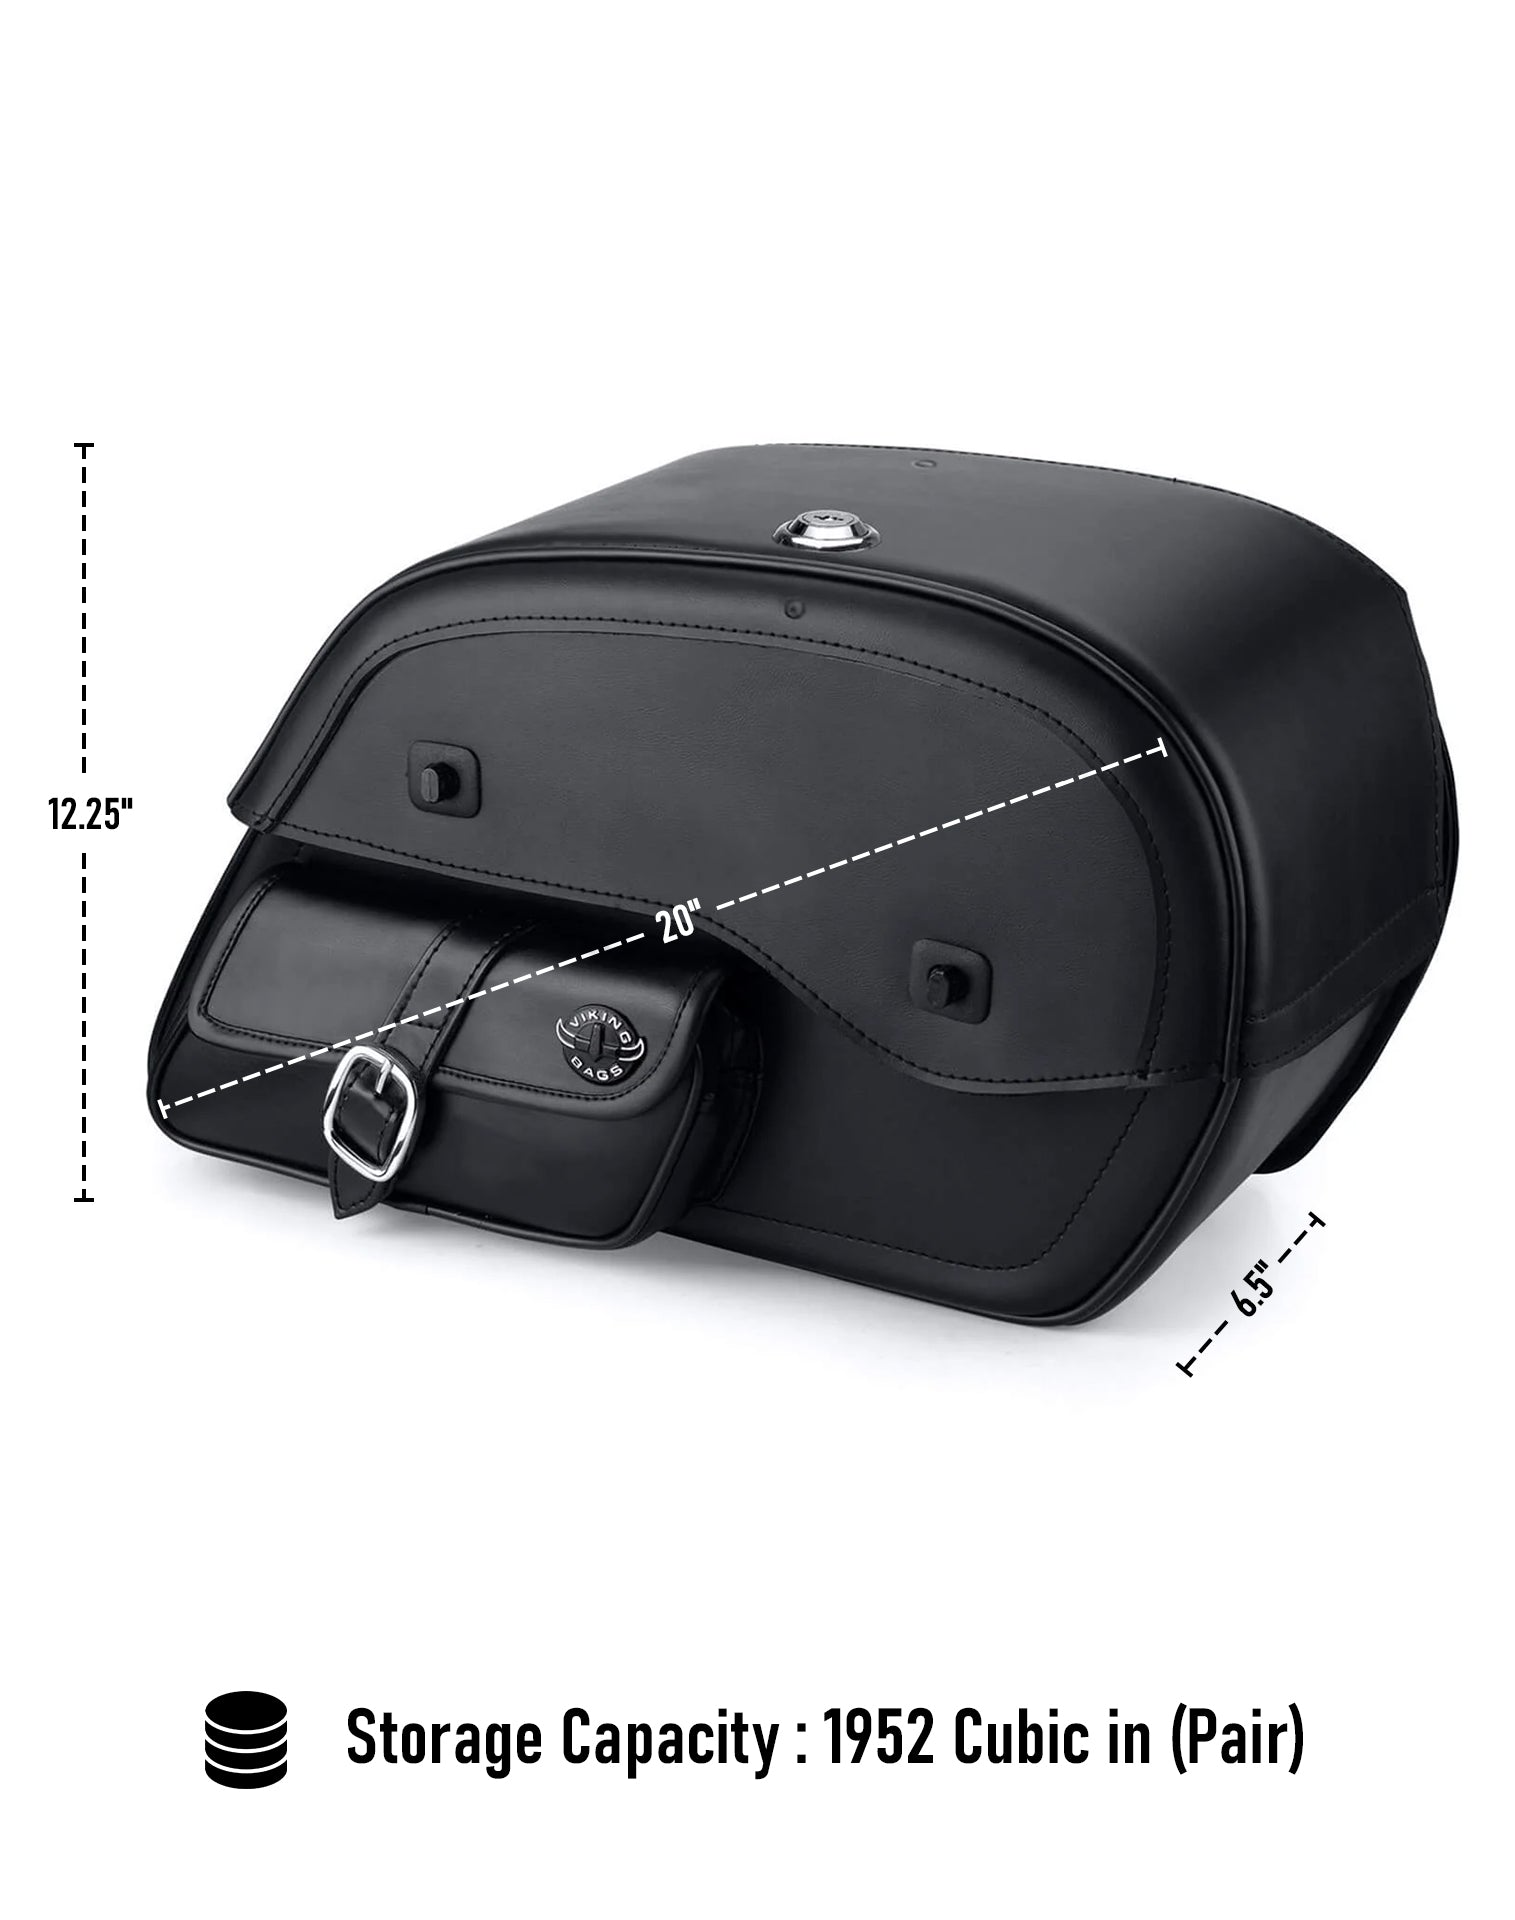 Viking Essential Side Pocket Large Leather Motorcycle Saddlebags For Harley Softail Slim Can Store Your Ridings Gears